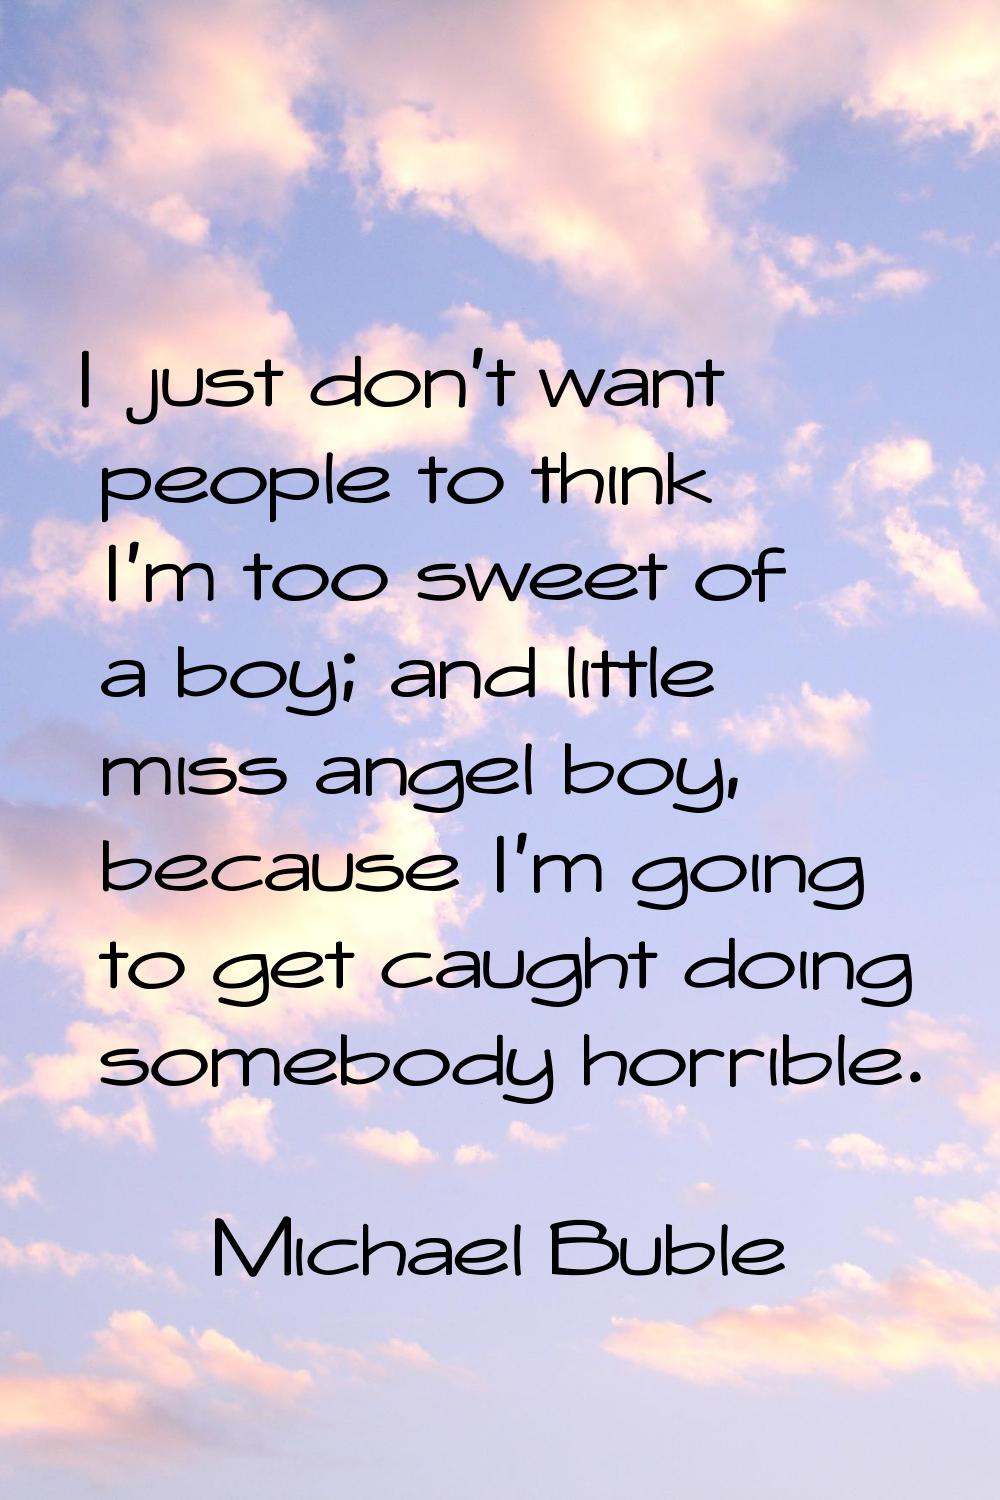 I just don't want people to think I'm too sweet of a boy; and little miss angel boy, because I'm go